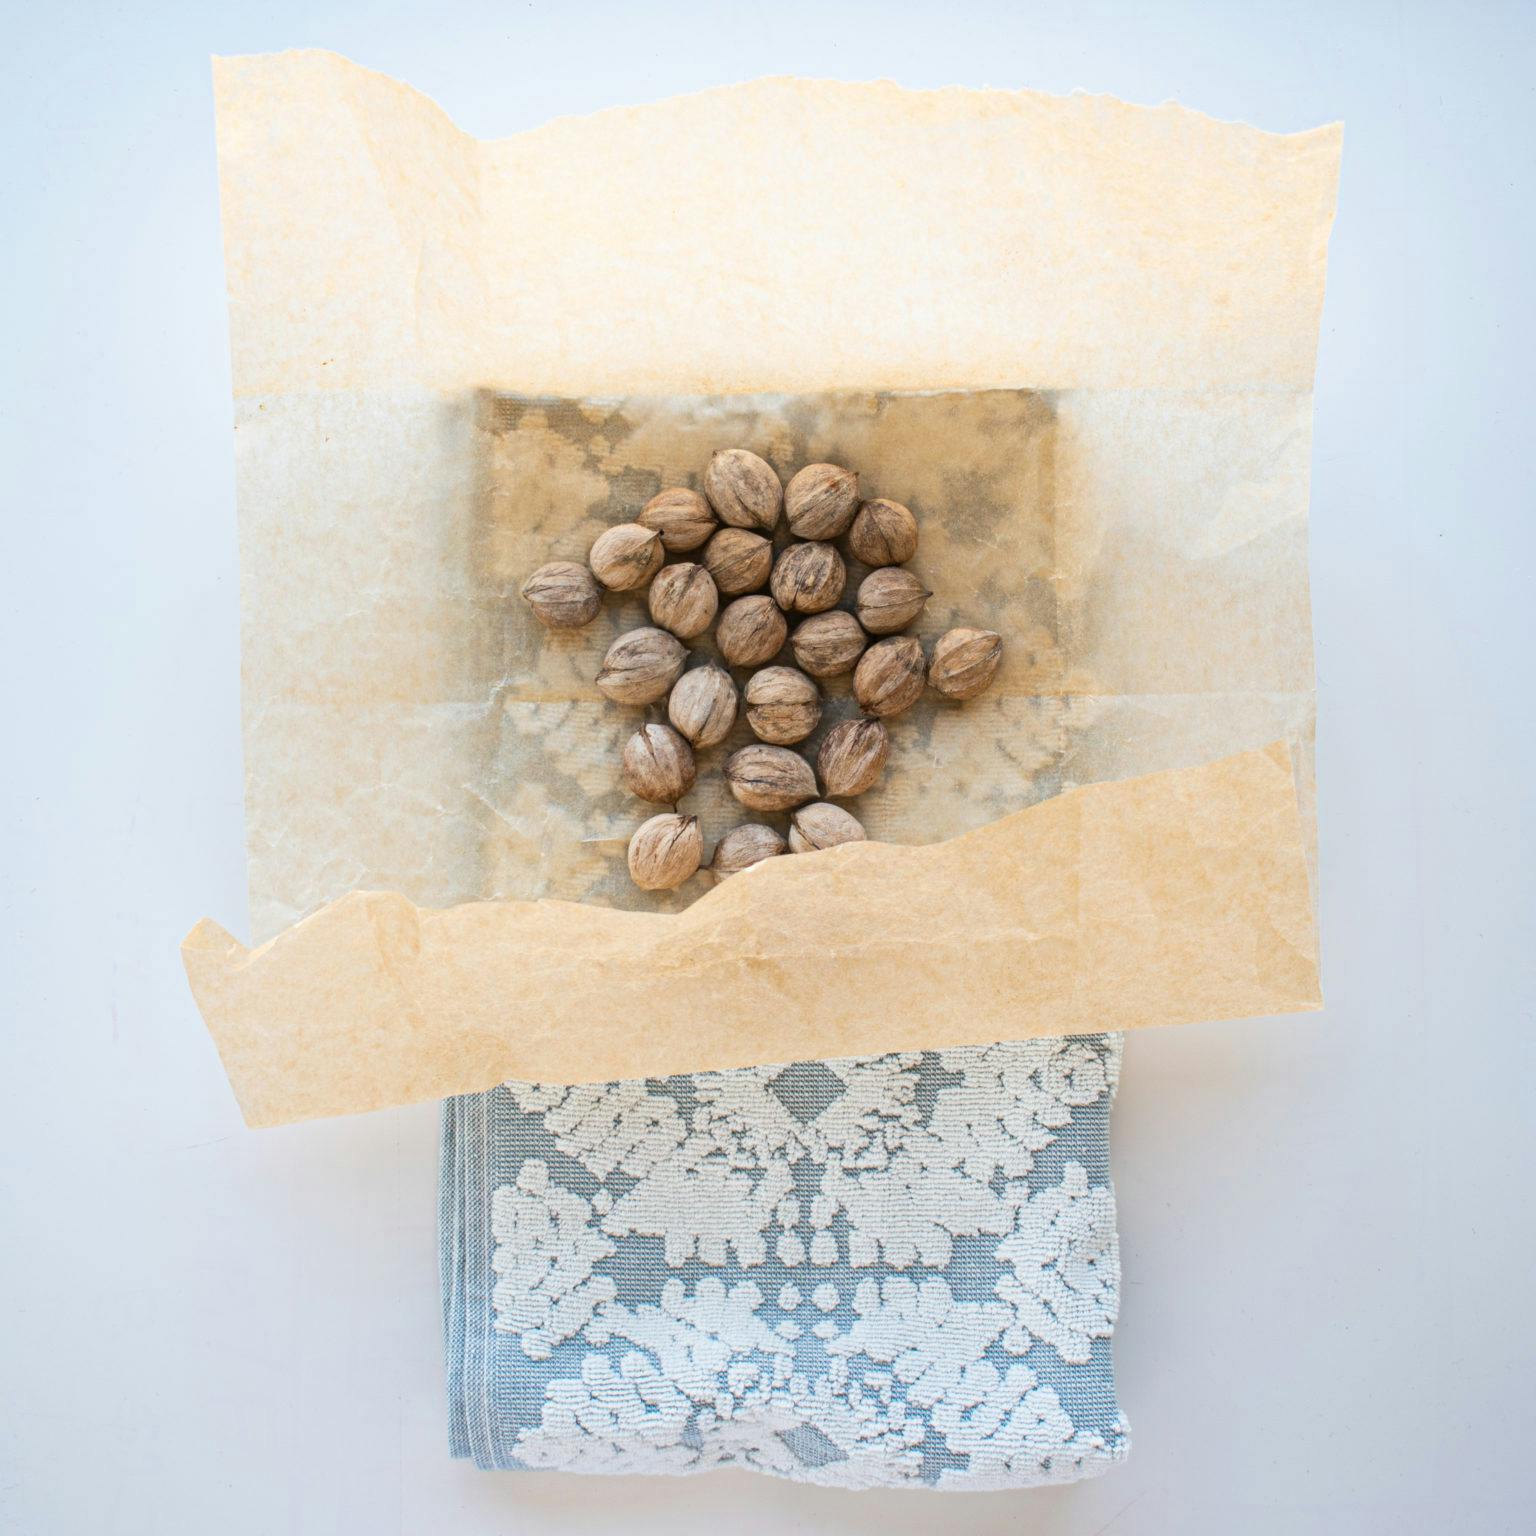 Put the nuts in a towel - we have them in parchment for easy handling